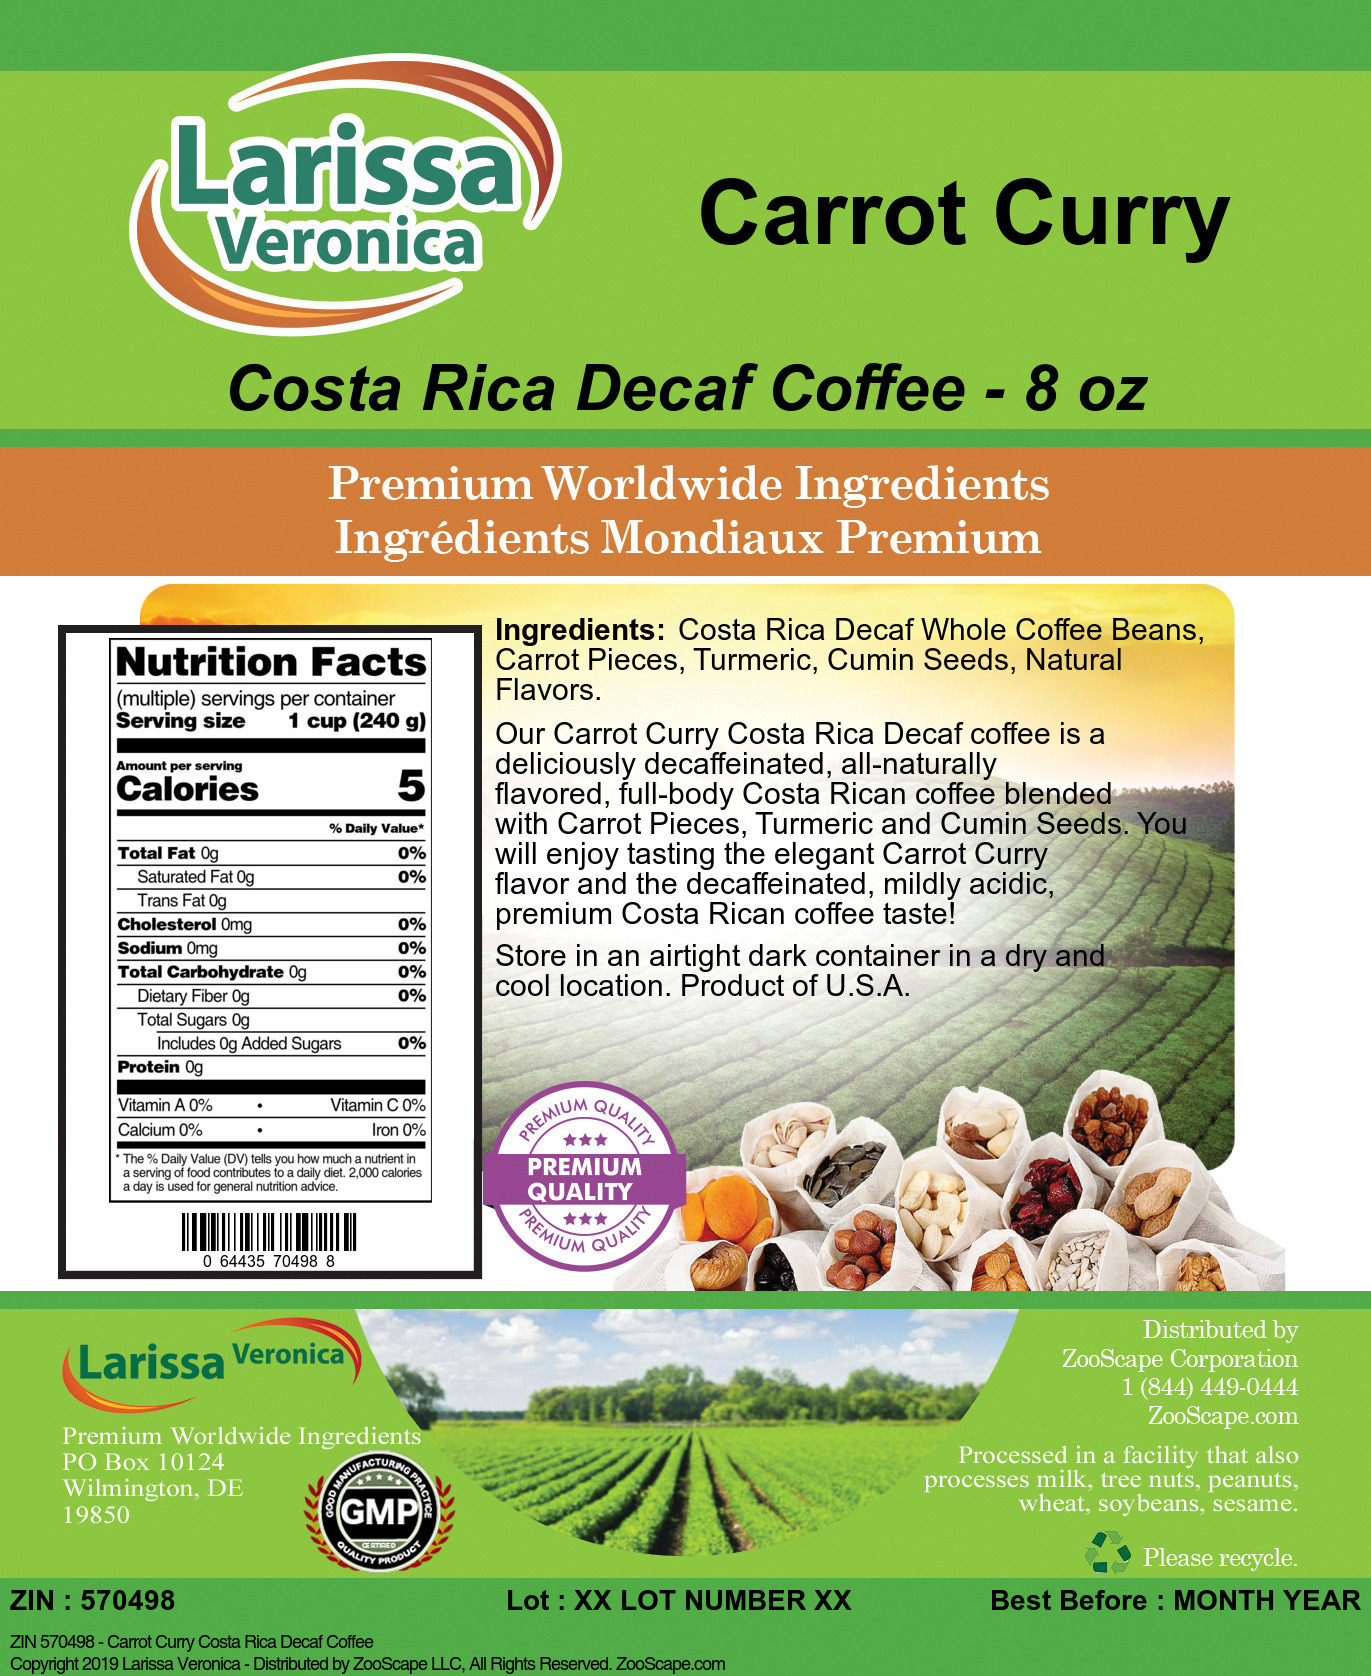 Carrot Curry Costa Rica Decaf Coffee - Label